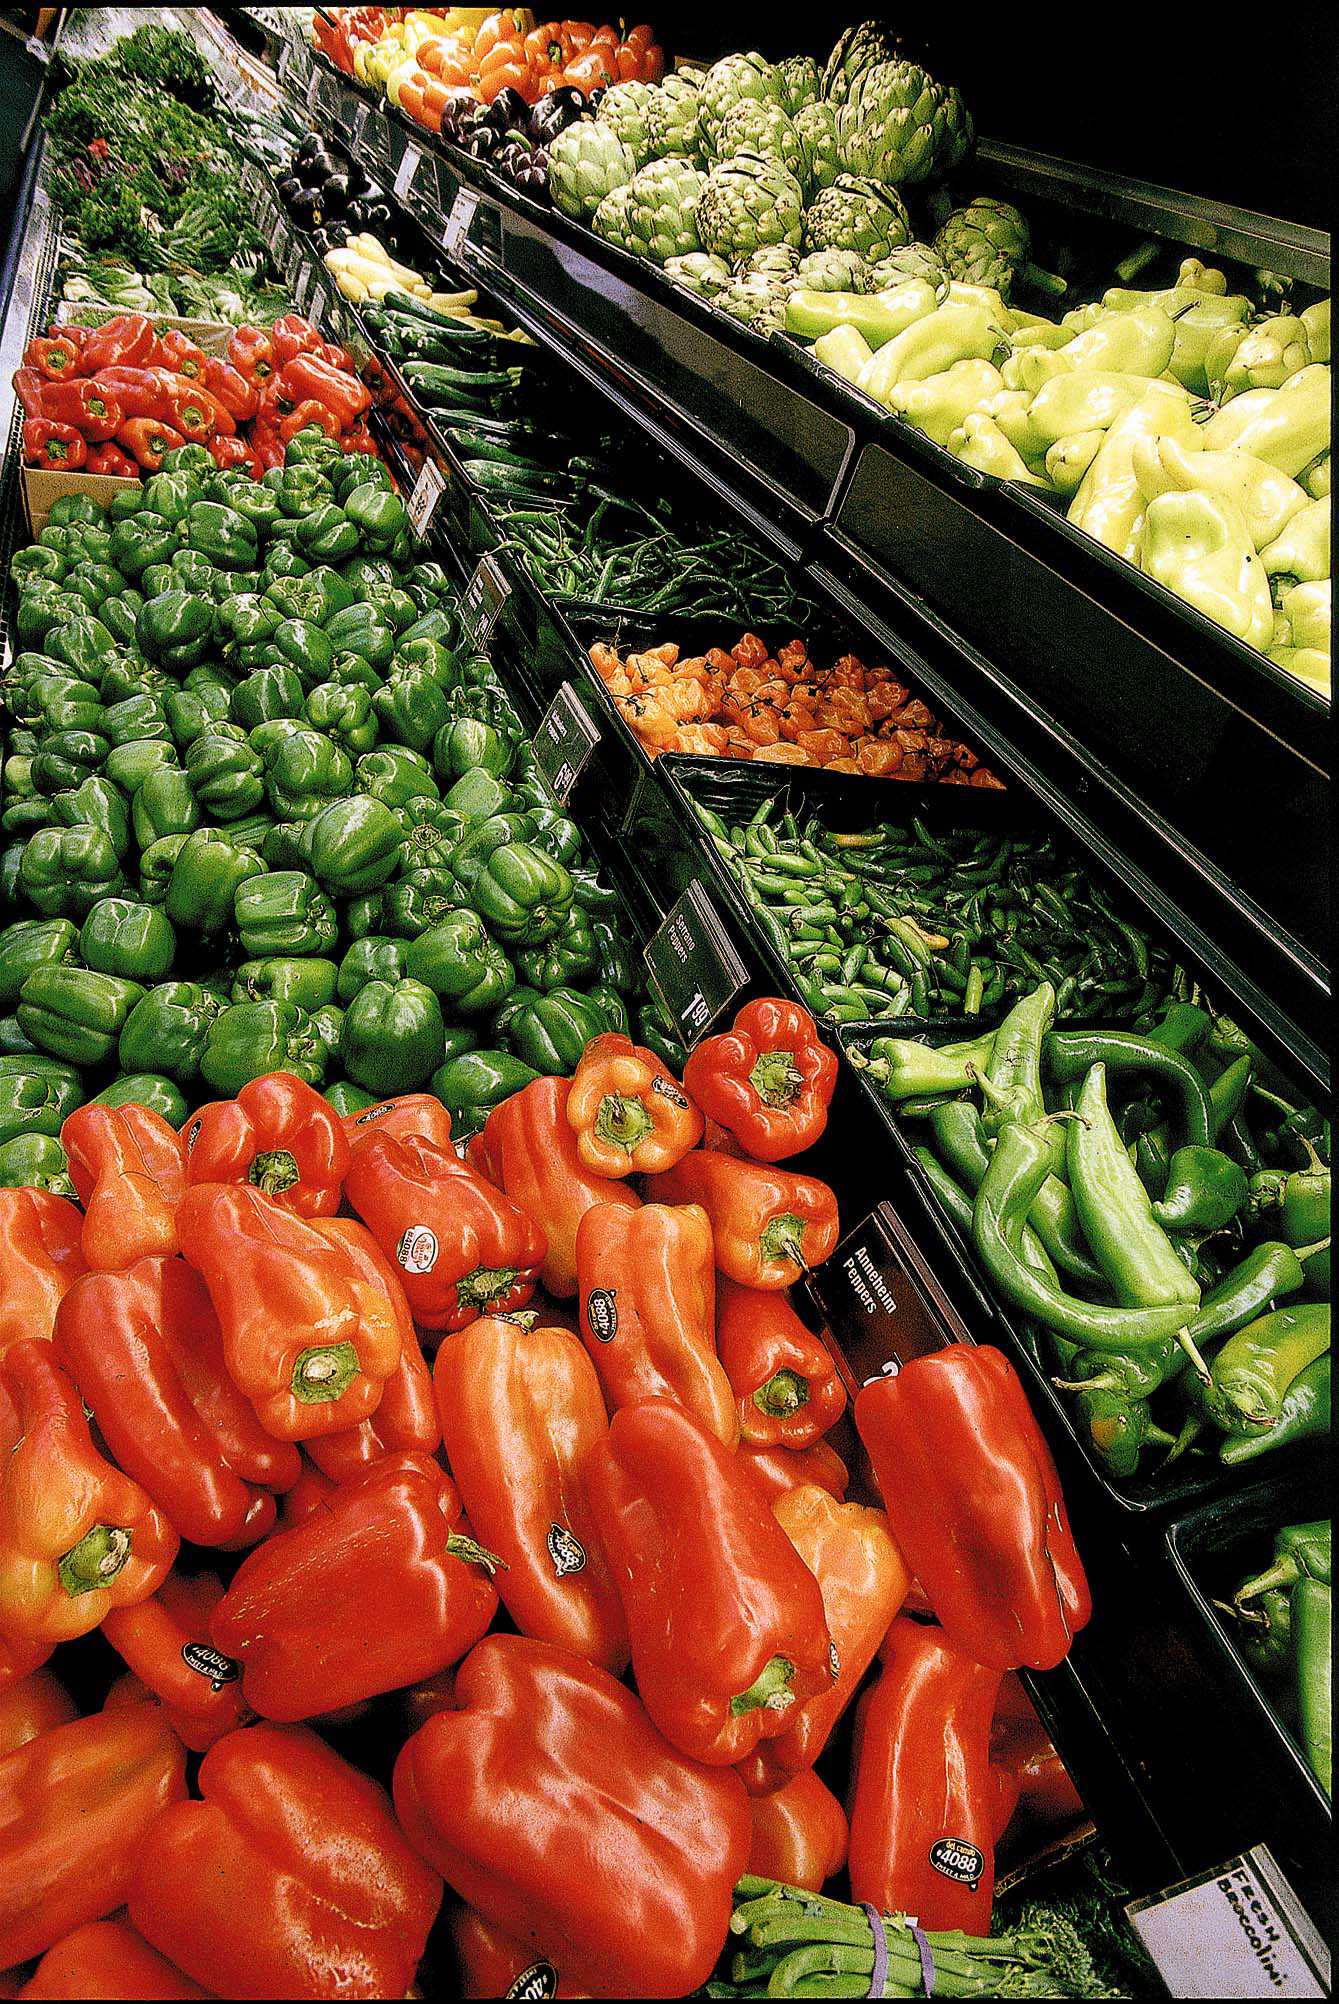 Healthy+foods+such+as+produce+are+found+in+the+perimeters+of+grocery+stores.+%28BOB+FILA%2FCHICAGO+TRIBUNE%29